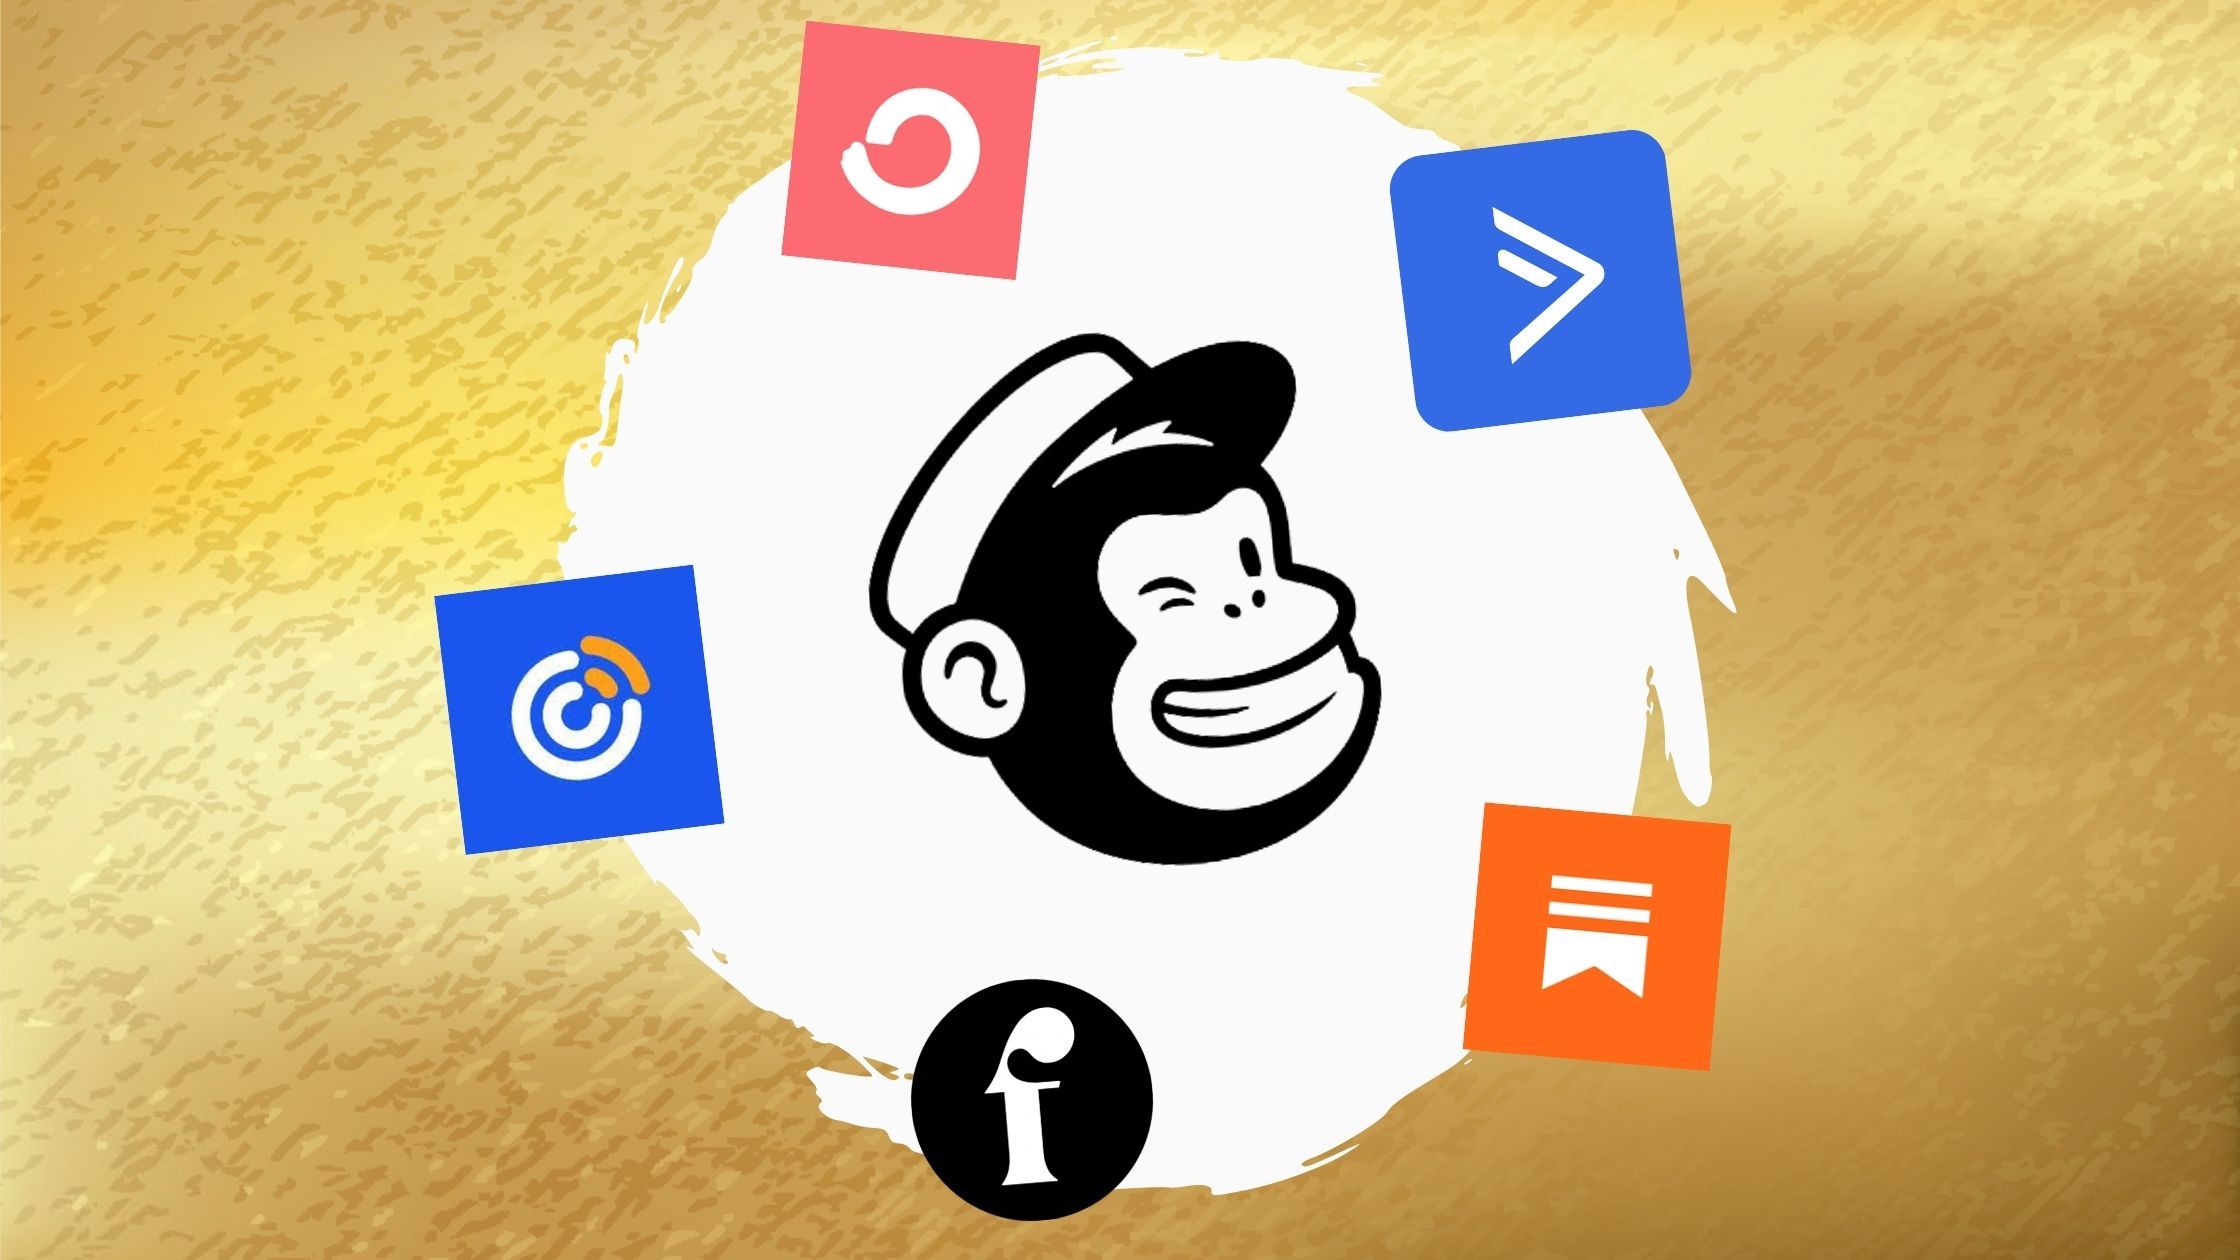 5 Mailchimp Alternatives to Consider This Year